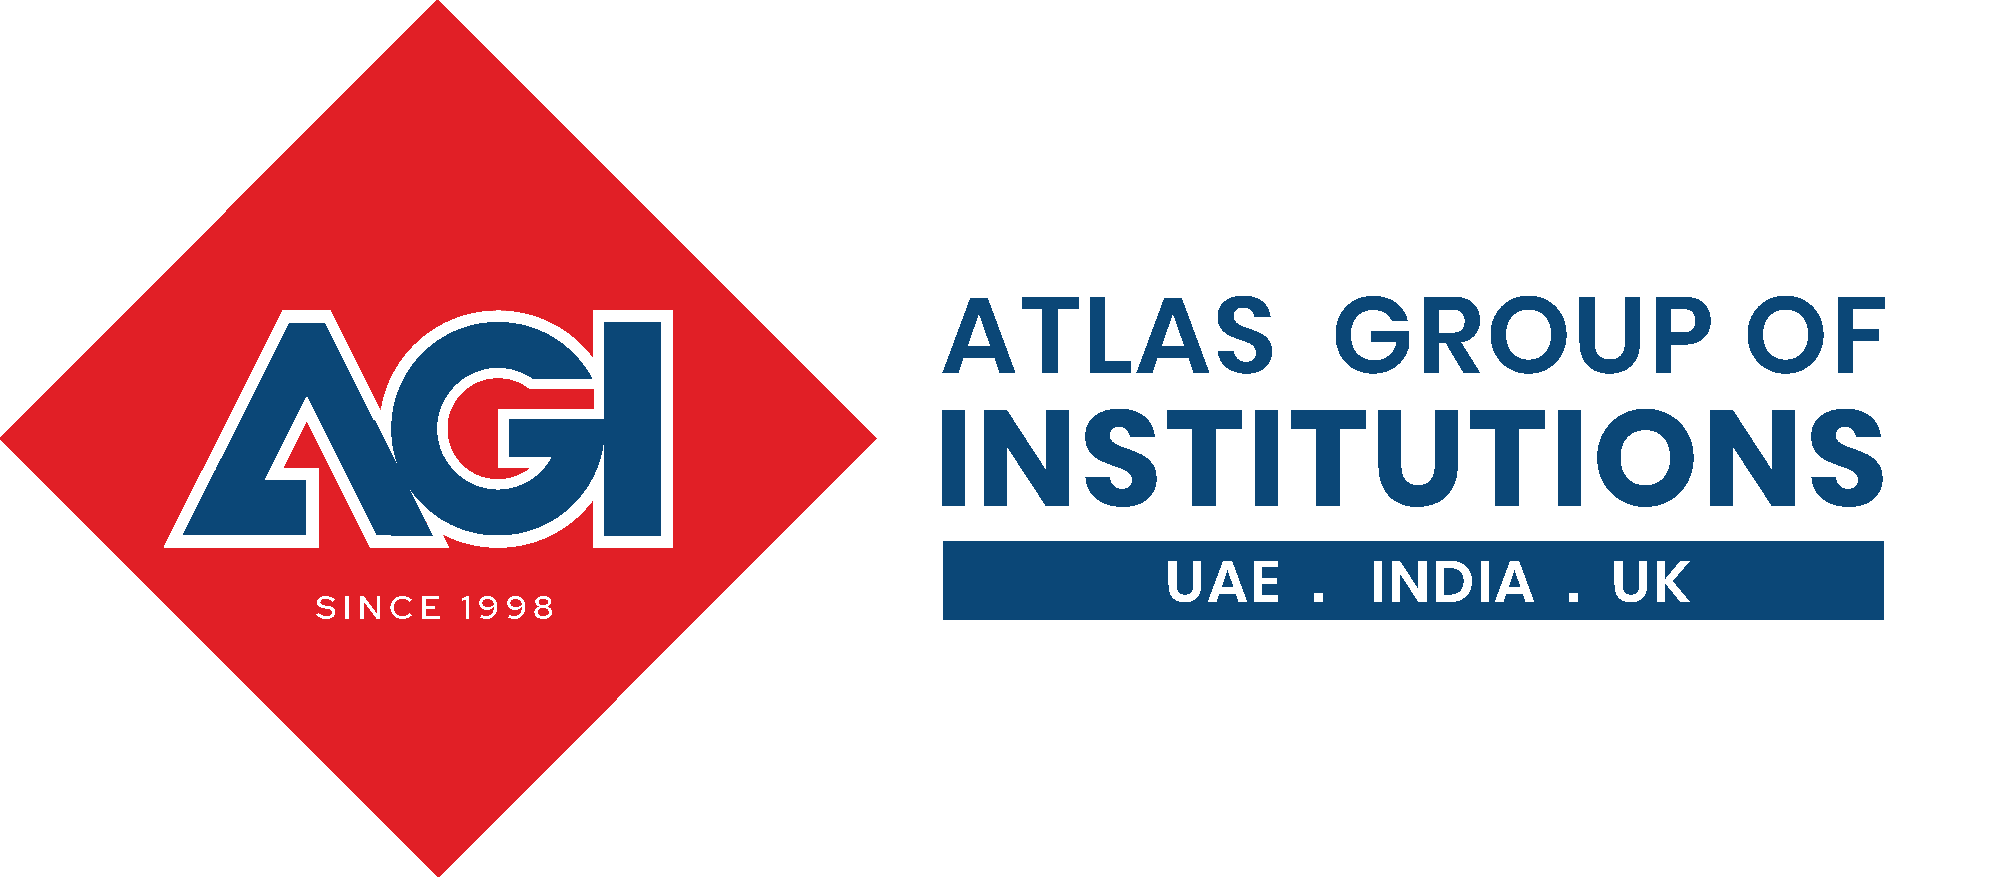 Atlas Group of Institutions